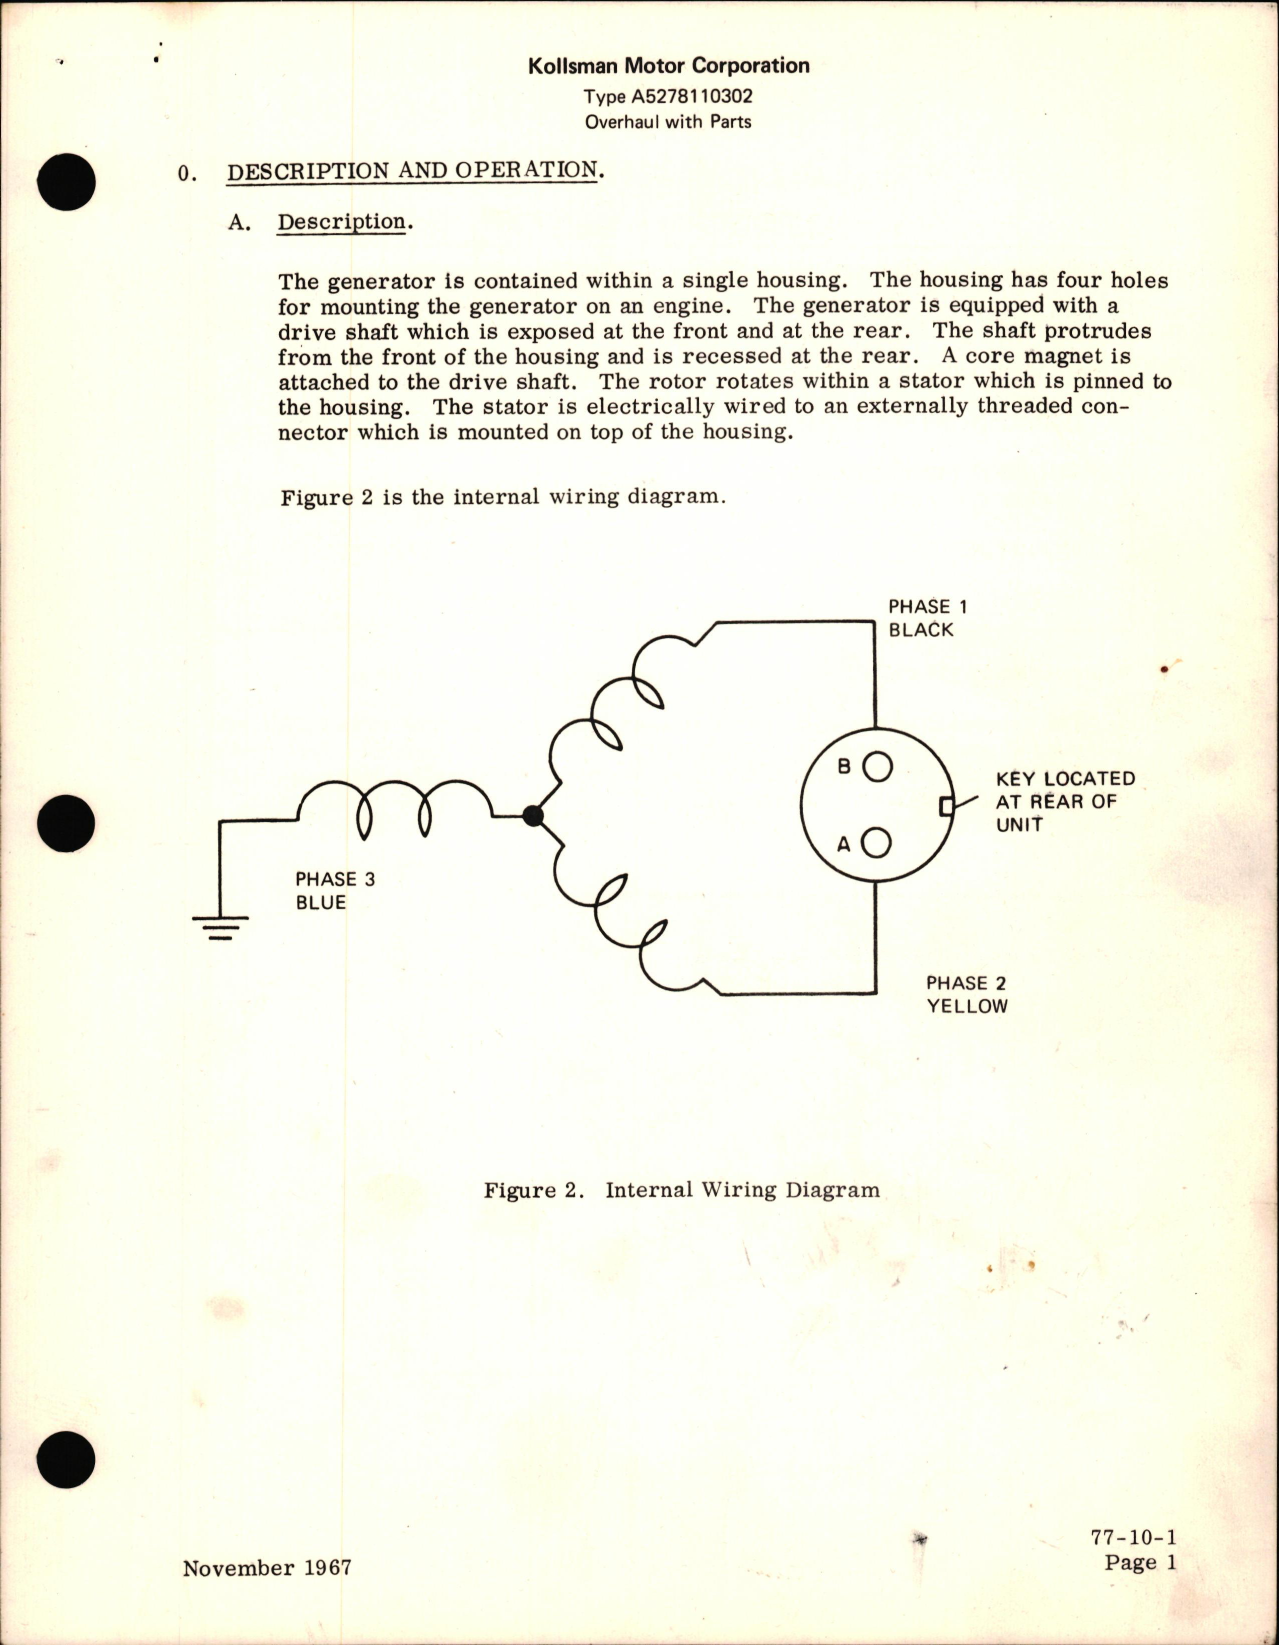 Sample page 5 from AirCorps Library document: Overhaul Instructions with Parts for Tachometer Generator - Type A5278110302 